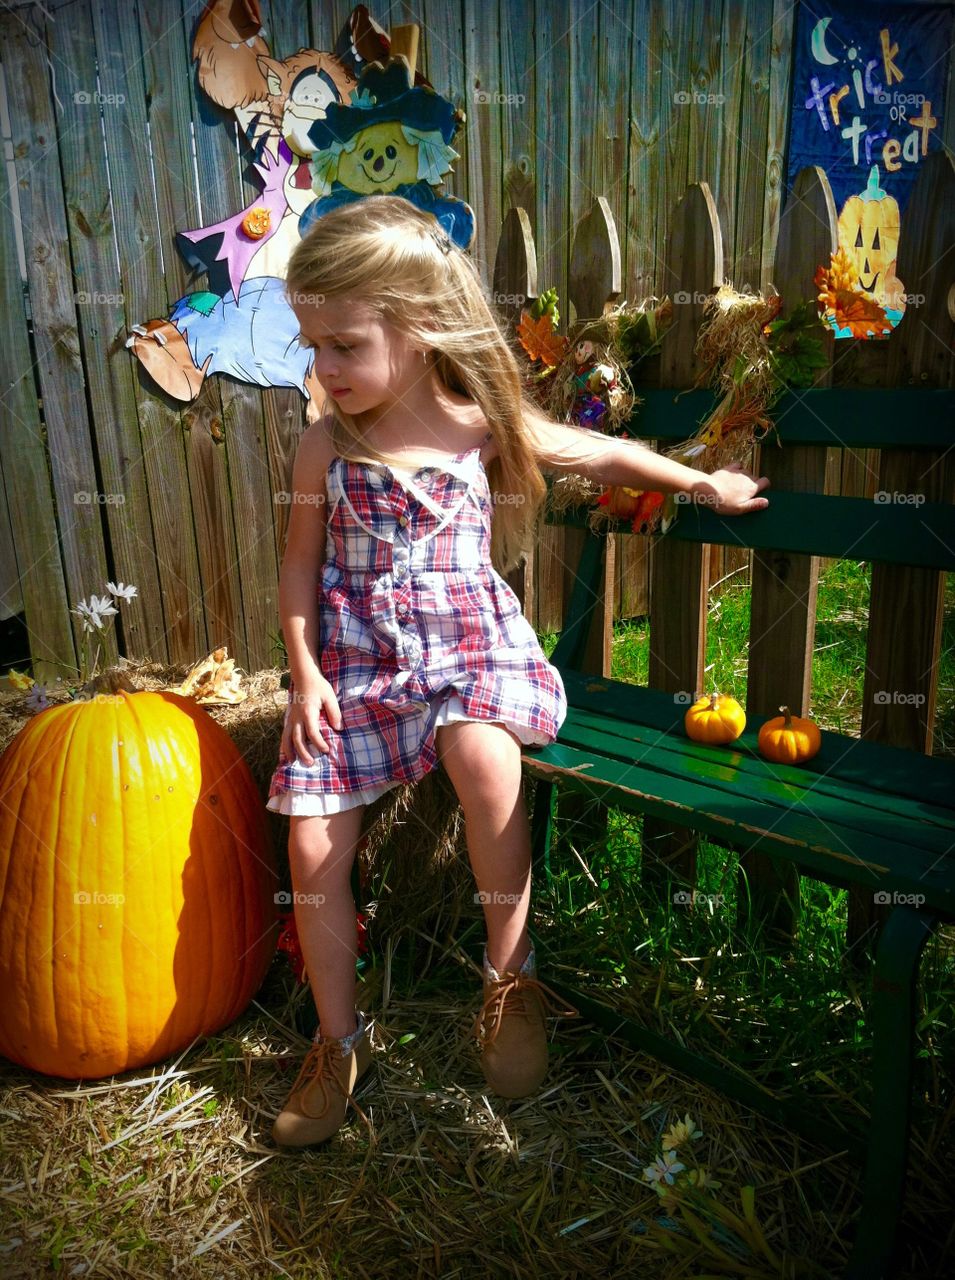 Cute girl sitting with pumpkin on bench